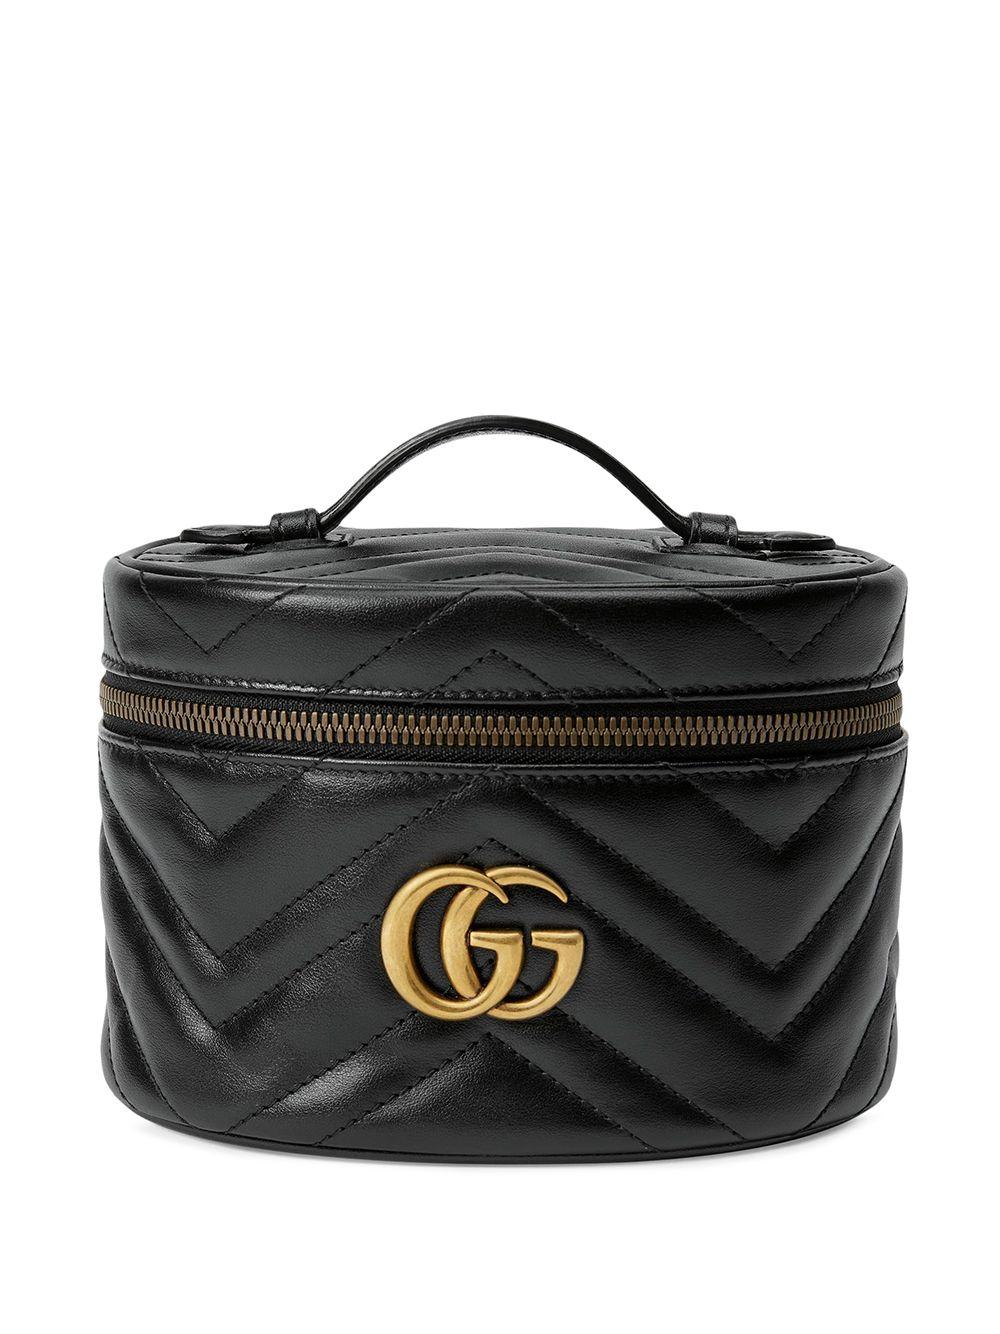 Gucci Leather gg Marmont Cosmetic Case in Black | Lyst